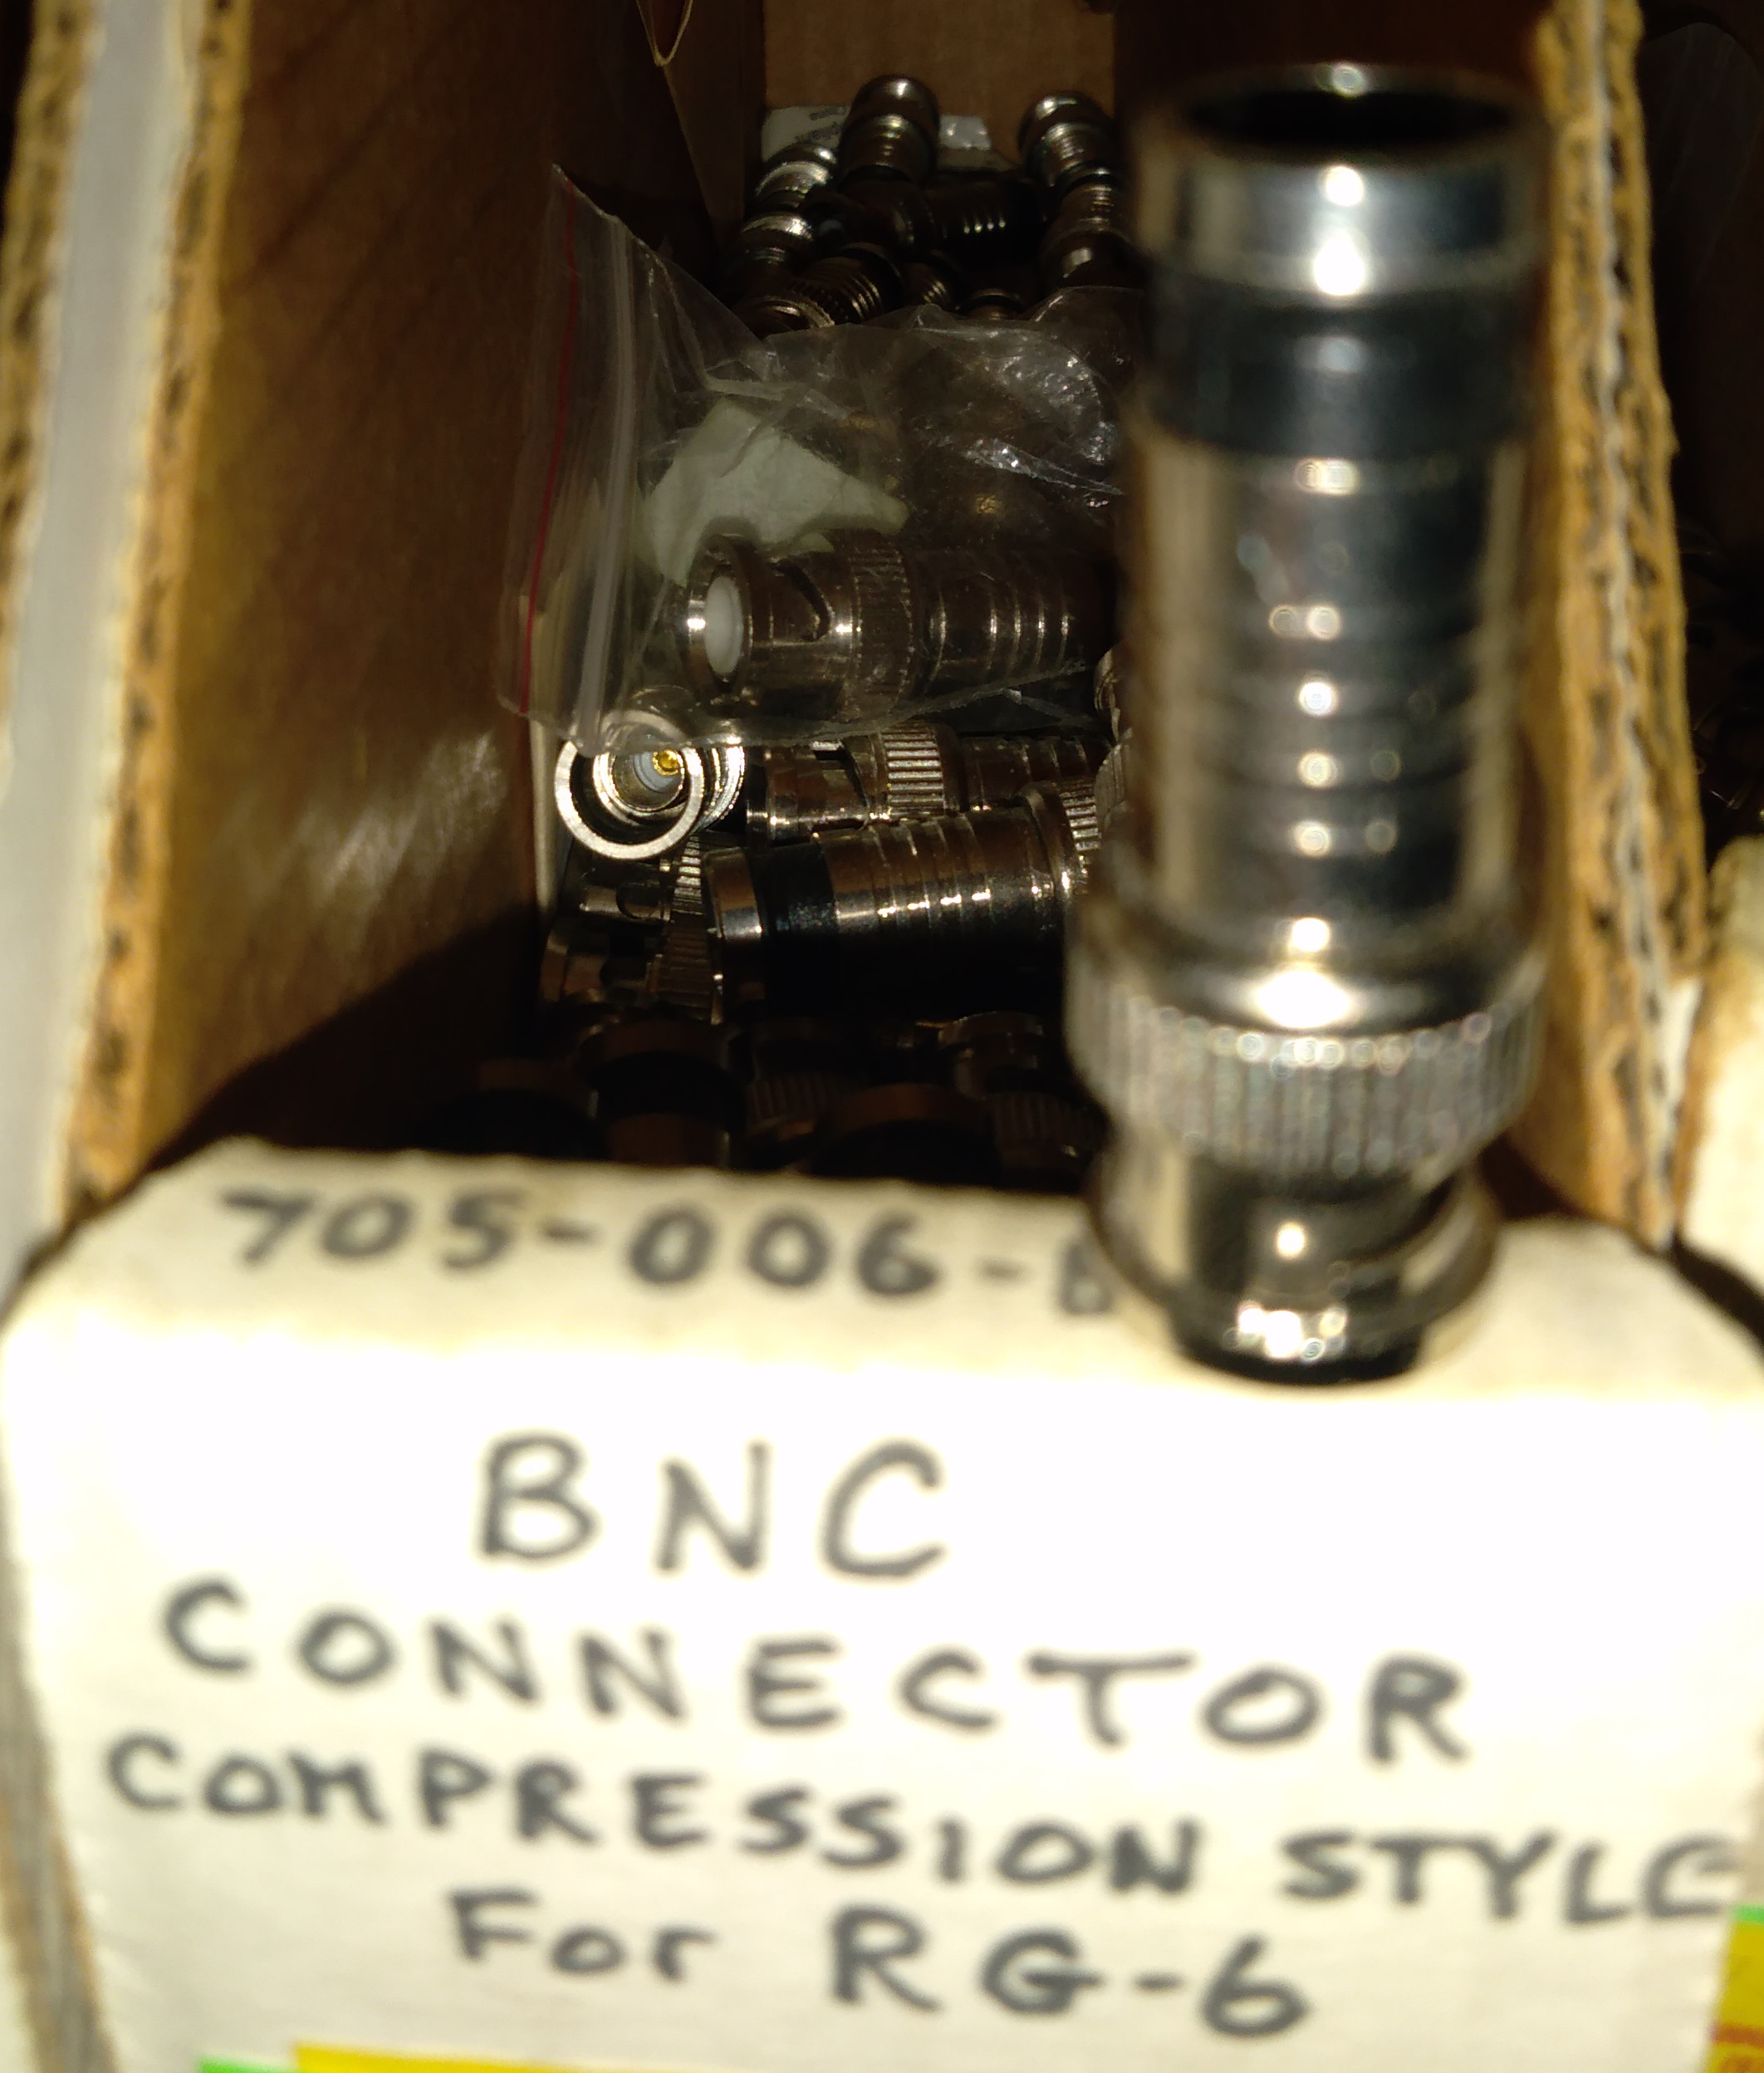 BNC compression style for rg6